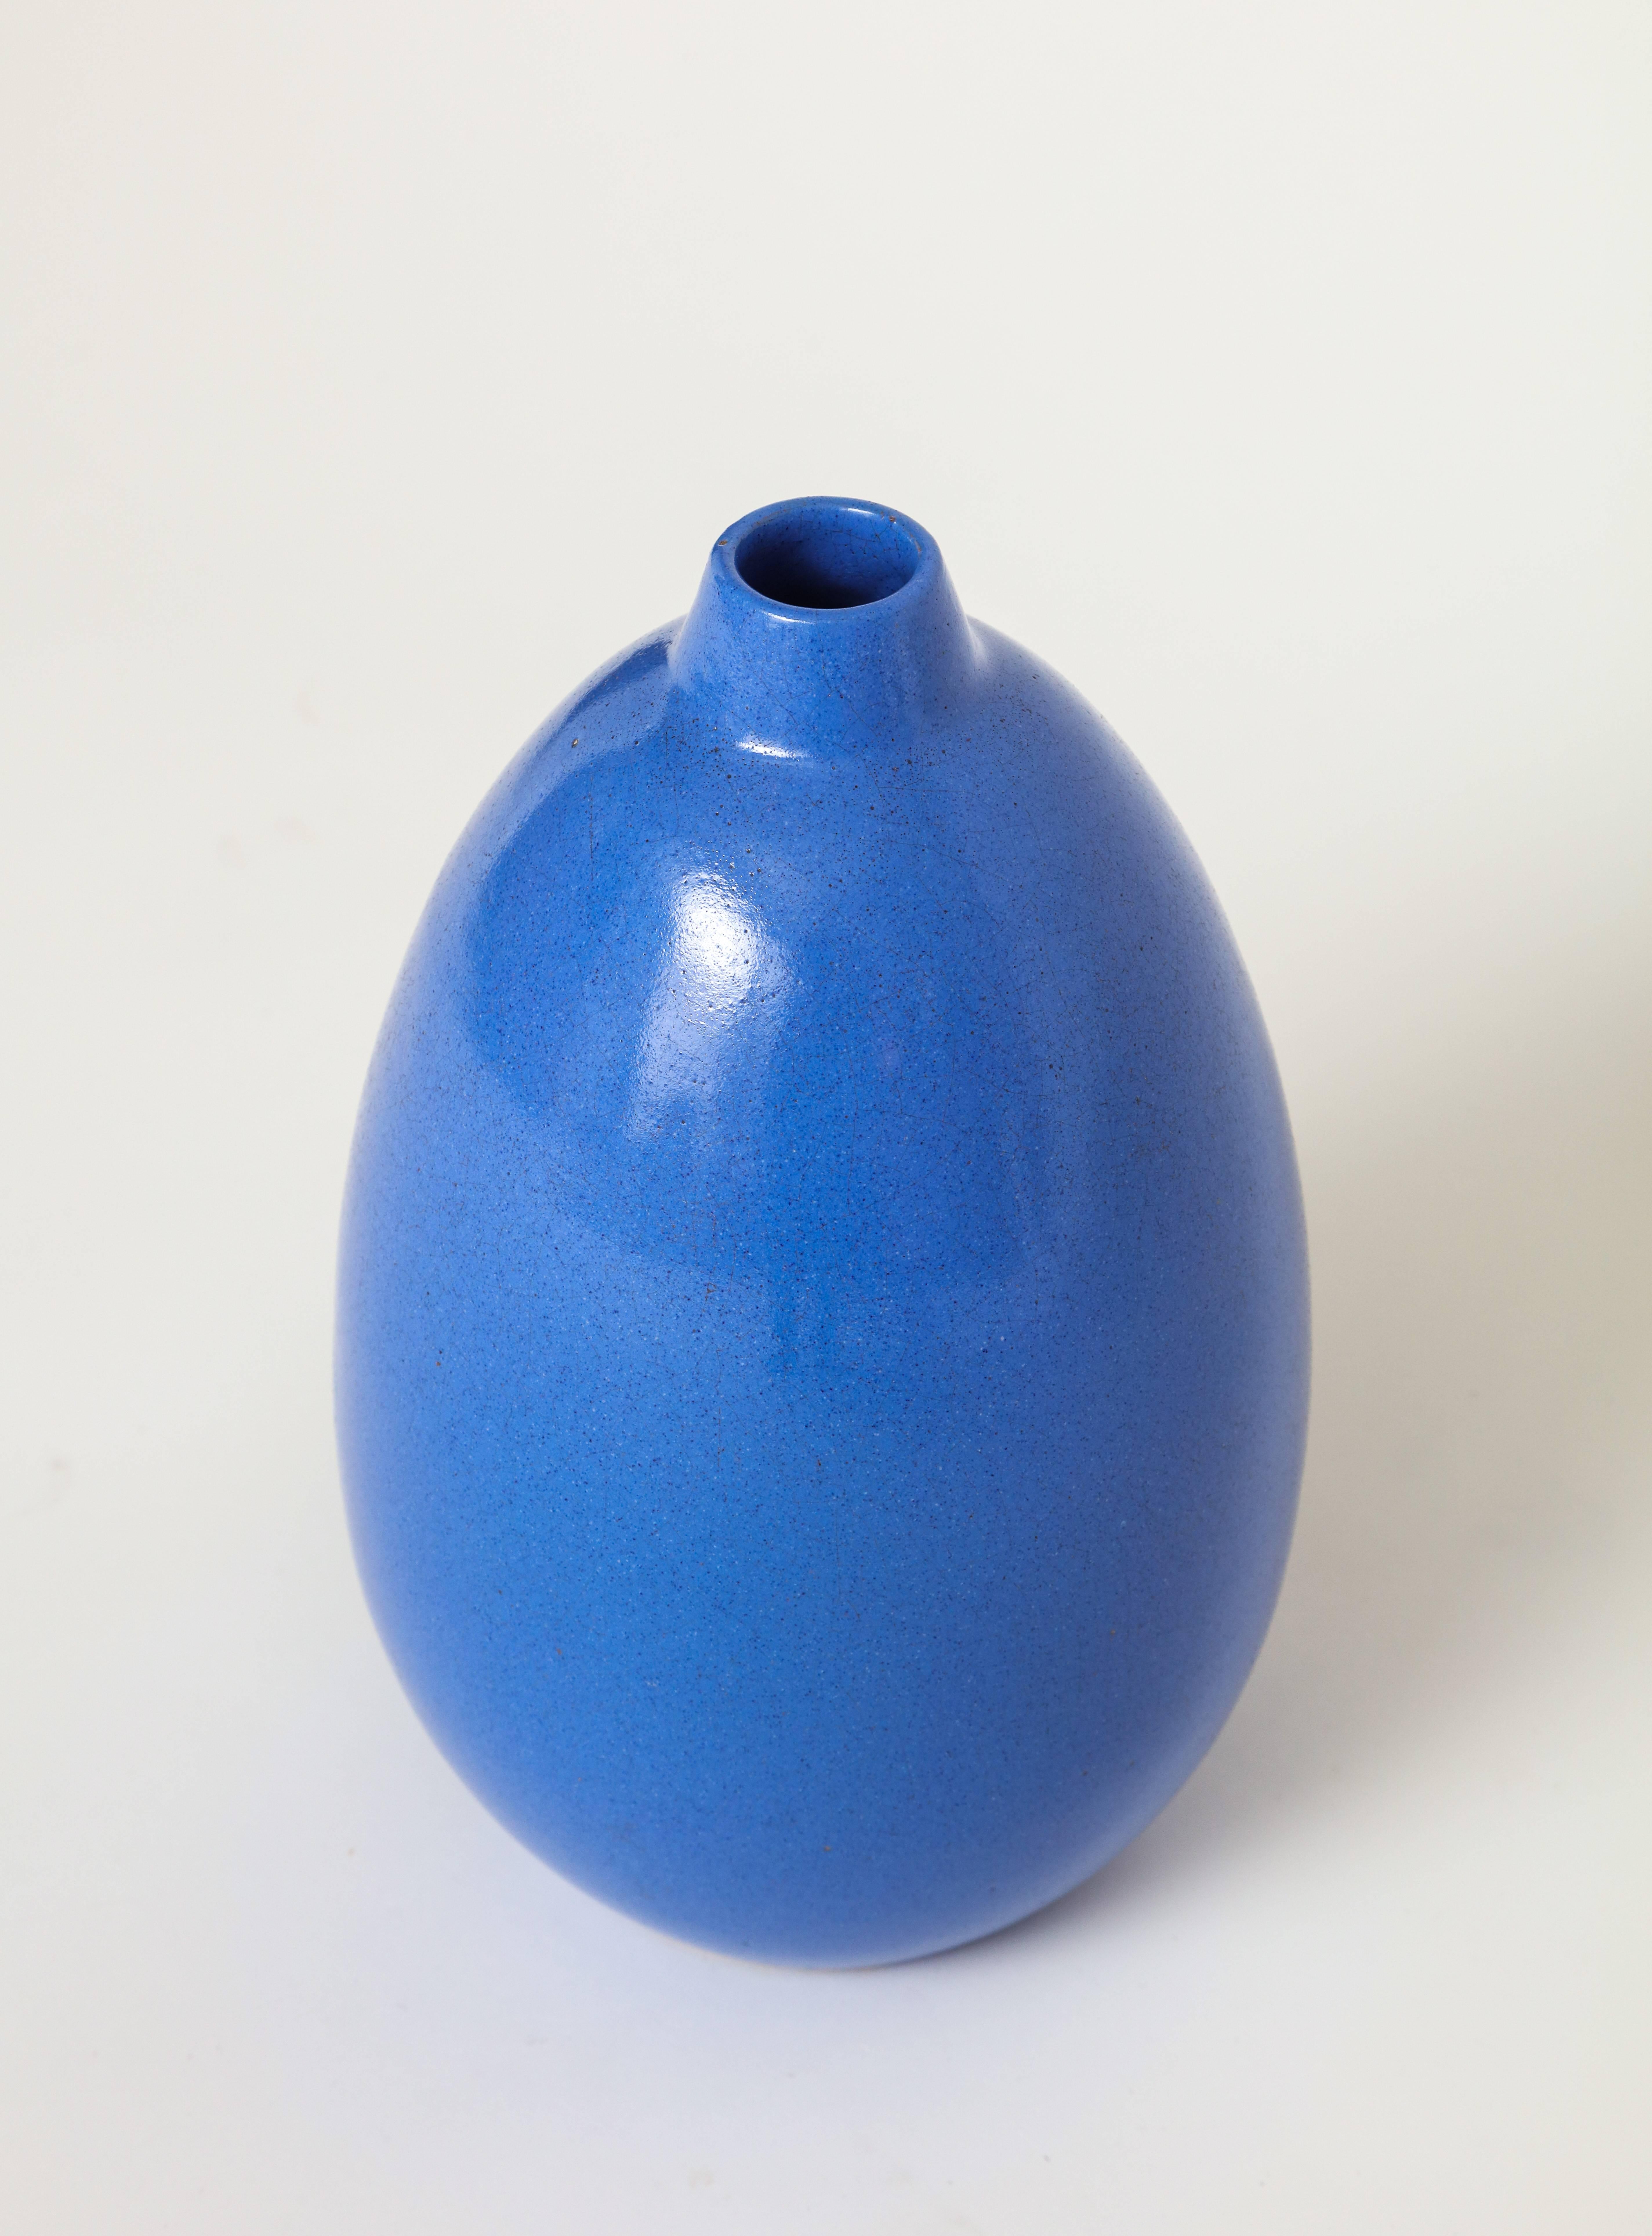 Primavera purple blue vase, France, 1930s.

Beautiful blue primavera in lovely condition with no chips or cracks. Rare in this color. Signed and numbered.